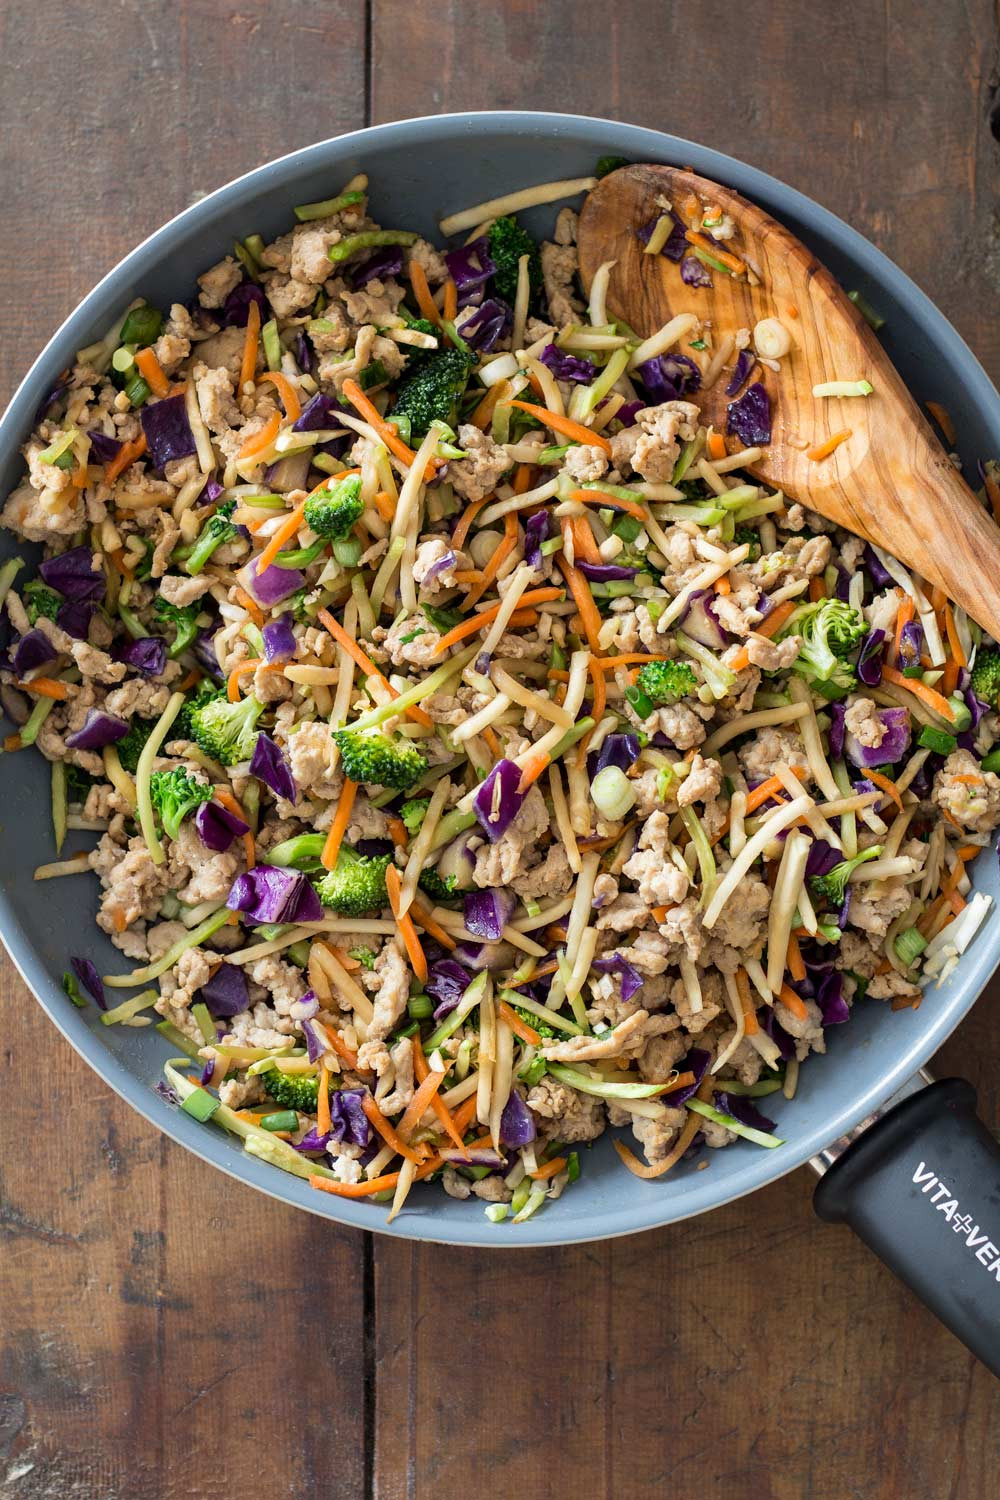 Low Carb Chicken Stir Fry Recipes
 The Ultimate Low Carb Stir Fry Green Healthy Cooking